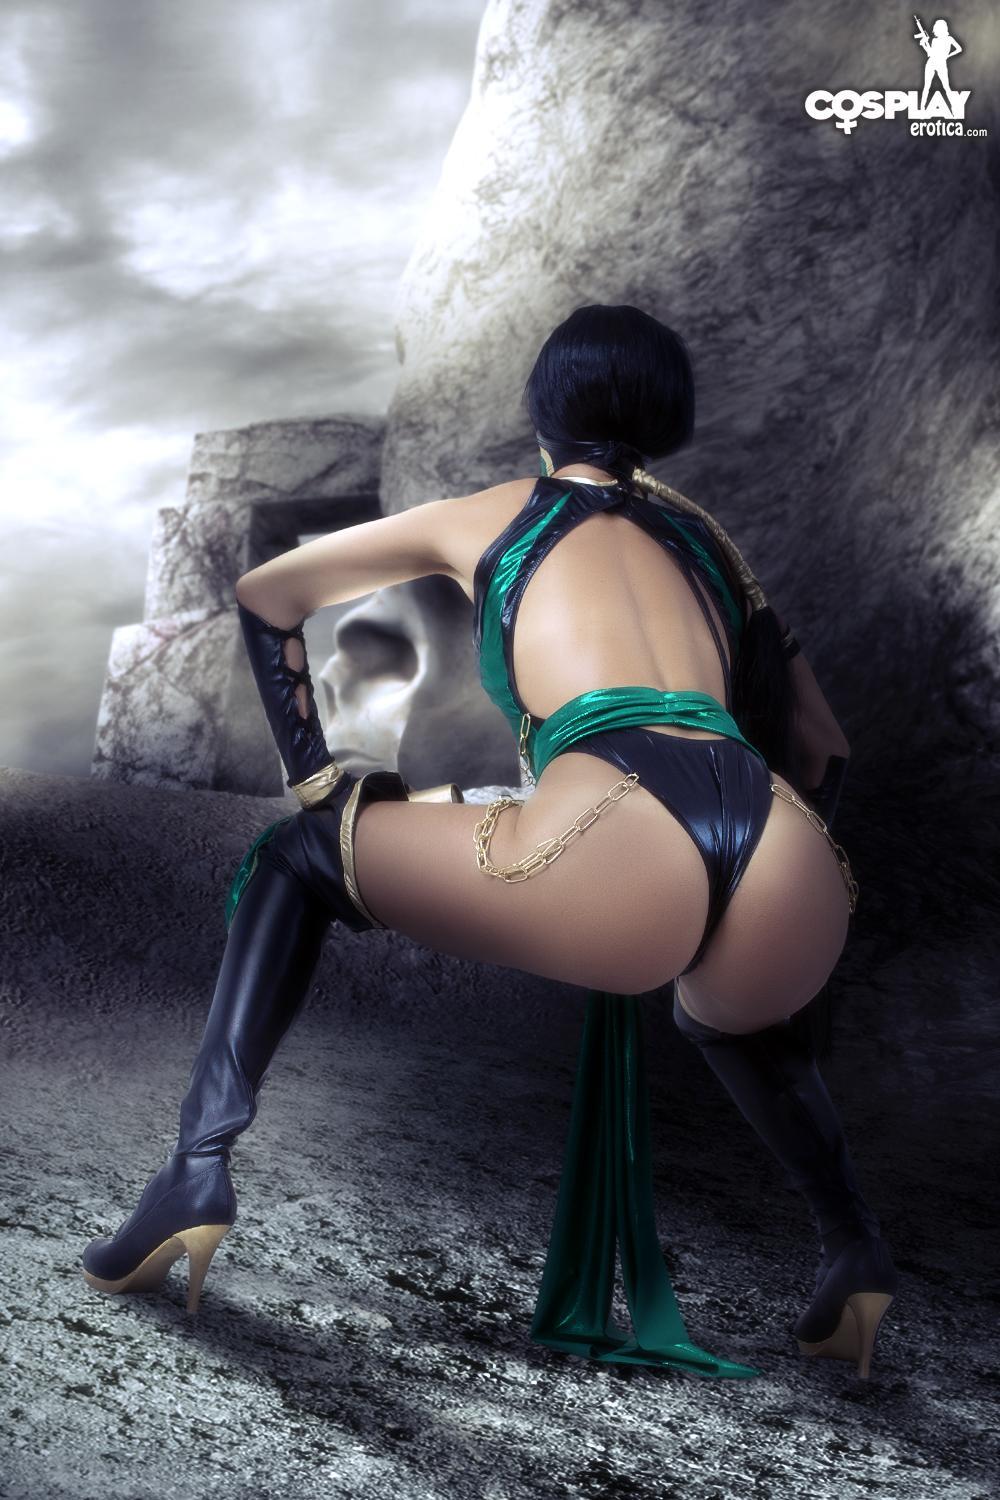 Cosplay babe Brownie dresses as a super hot Jade from Mortal Kombat #53563463